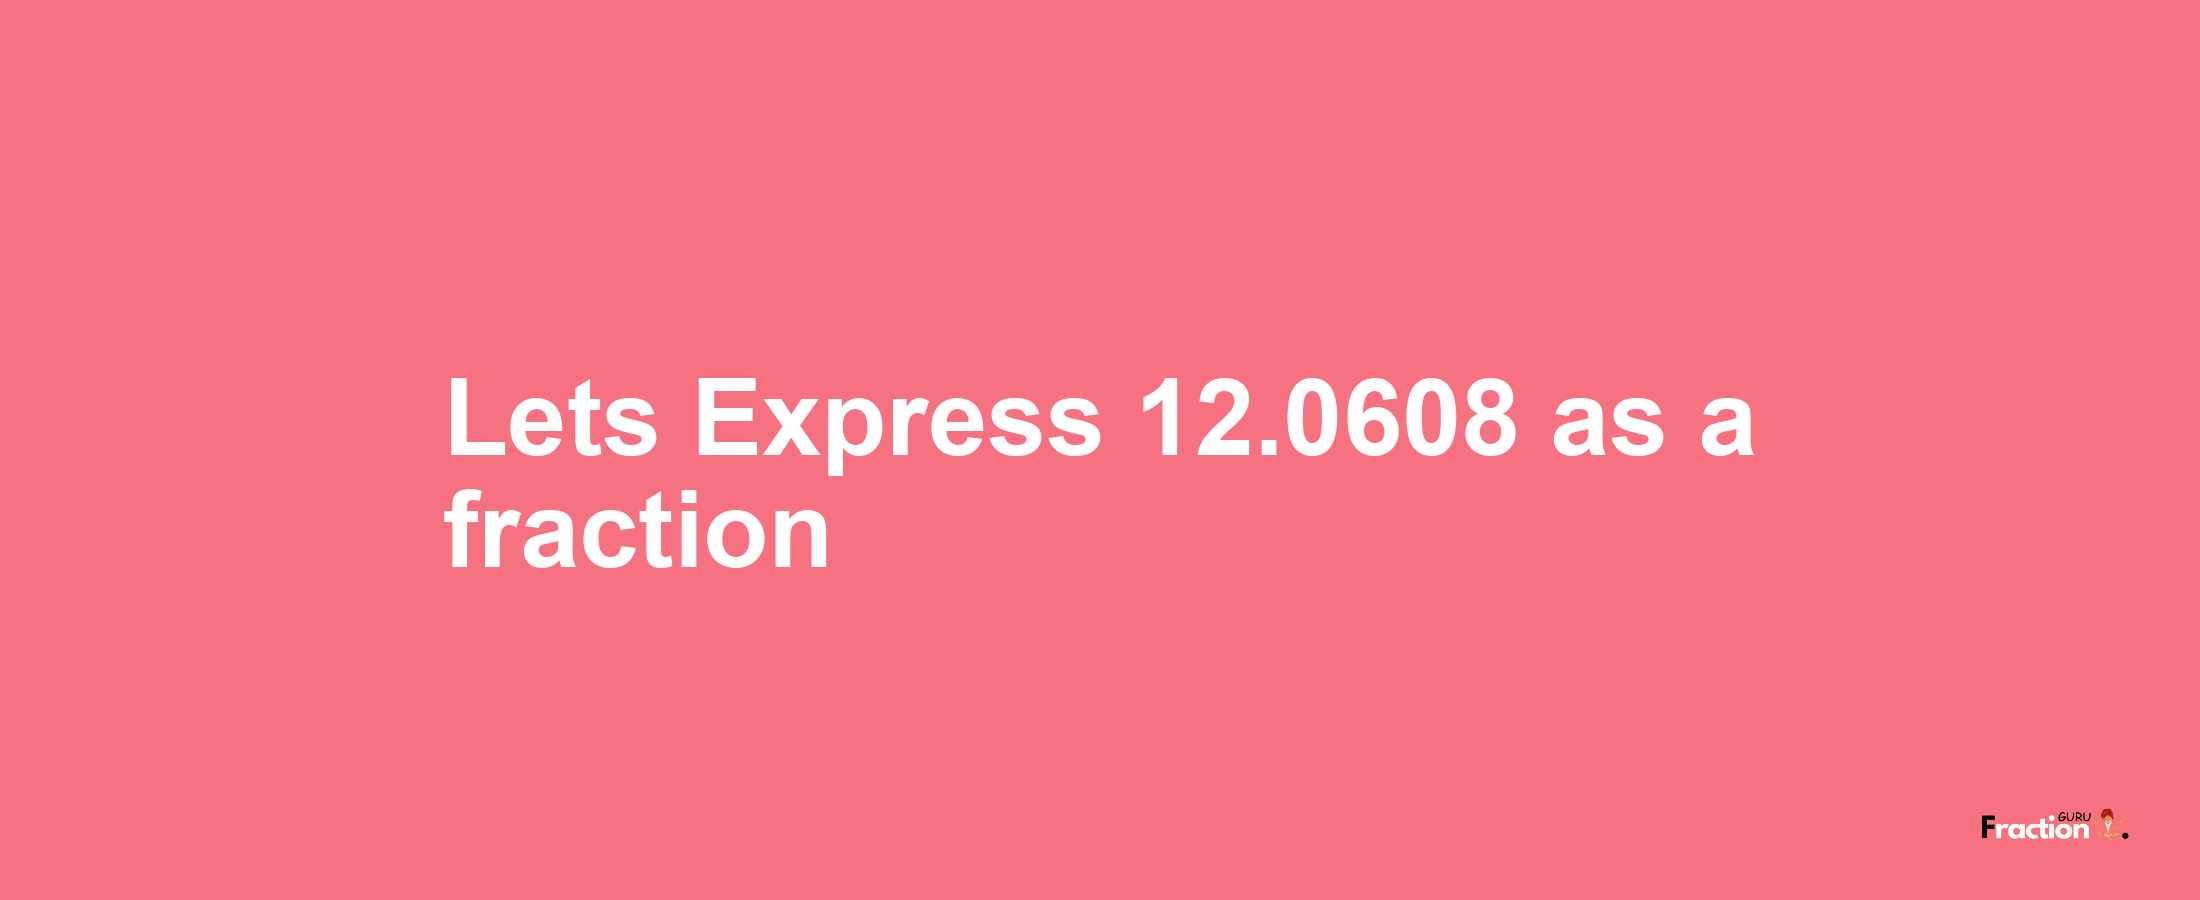 Lets Express 12.0608 as afraction